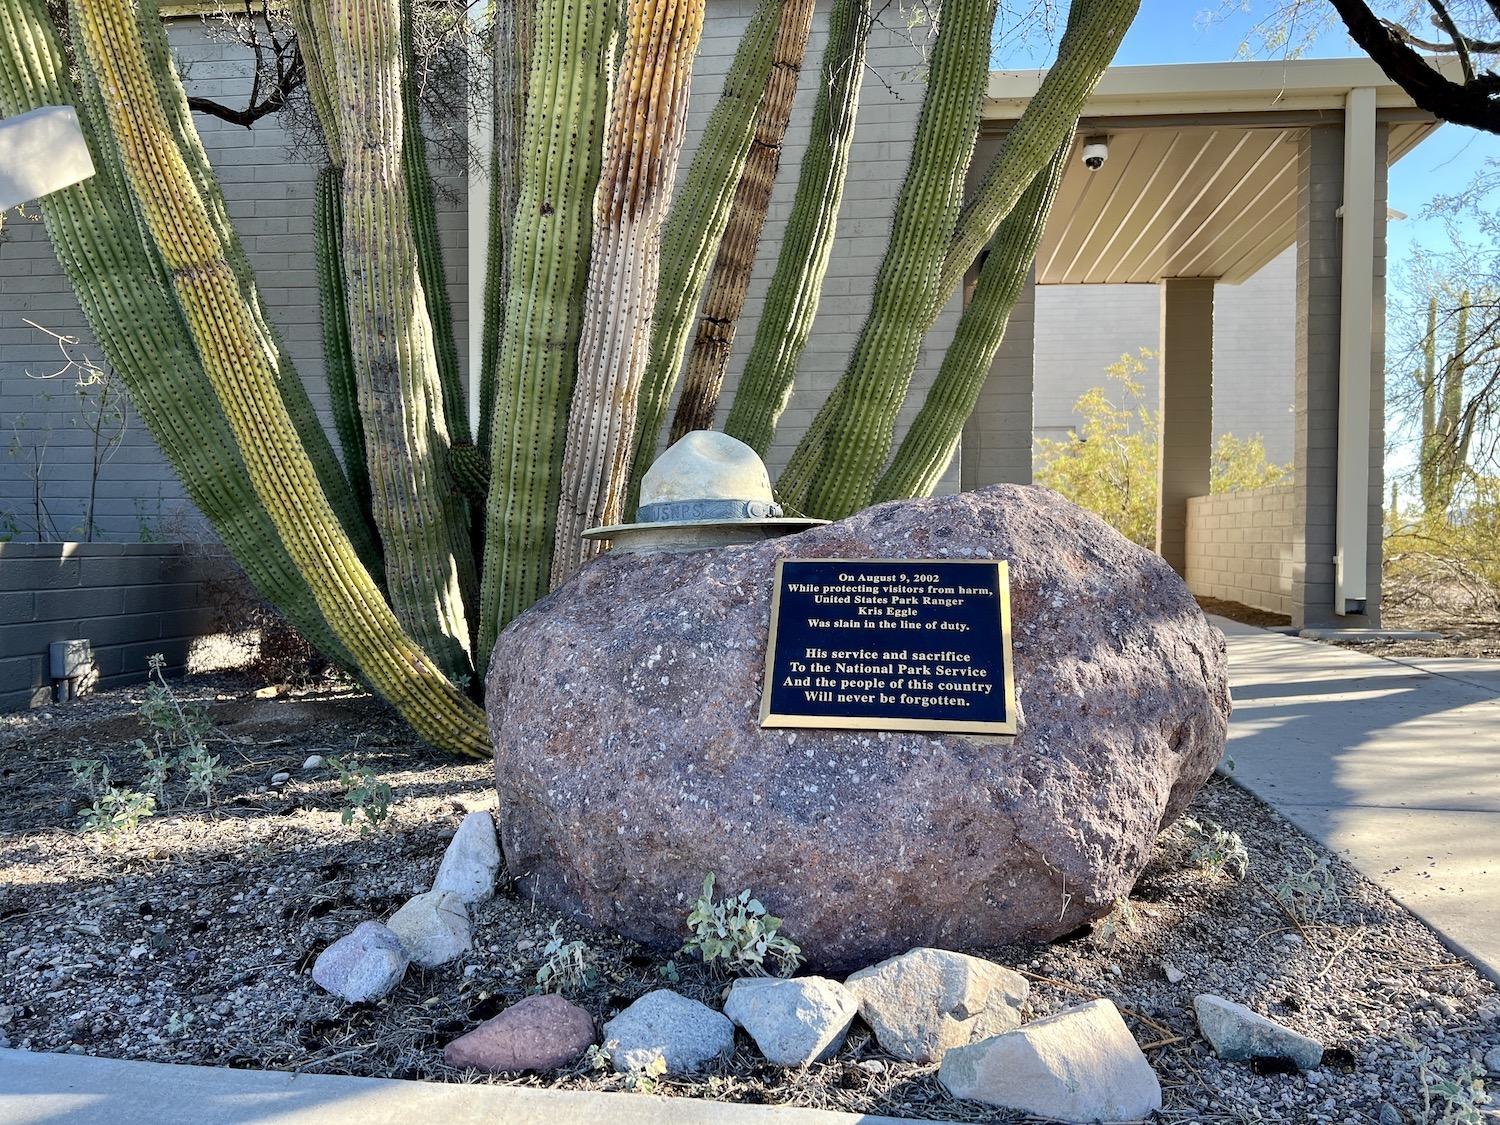 A memorial for murdered ranger Kris Eggle can be found under an organ pipe cactus at the Kris Eggle Visitor Center.